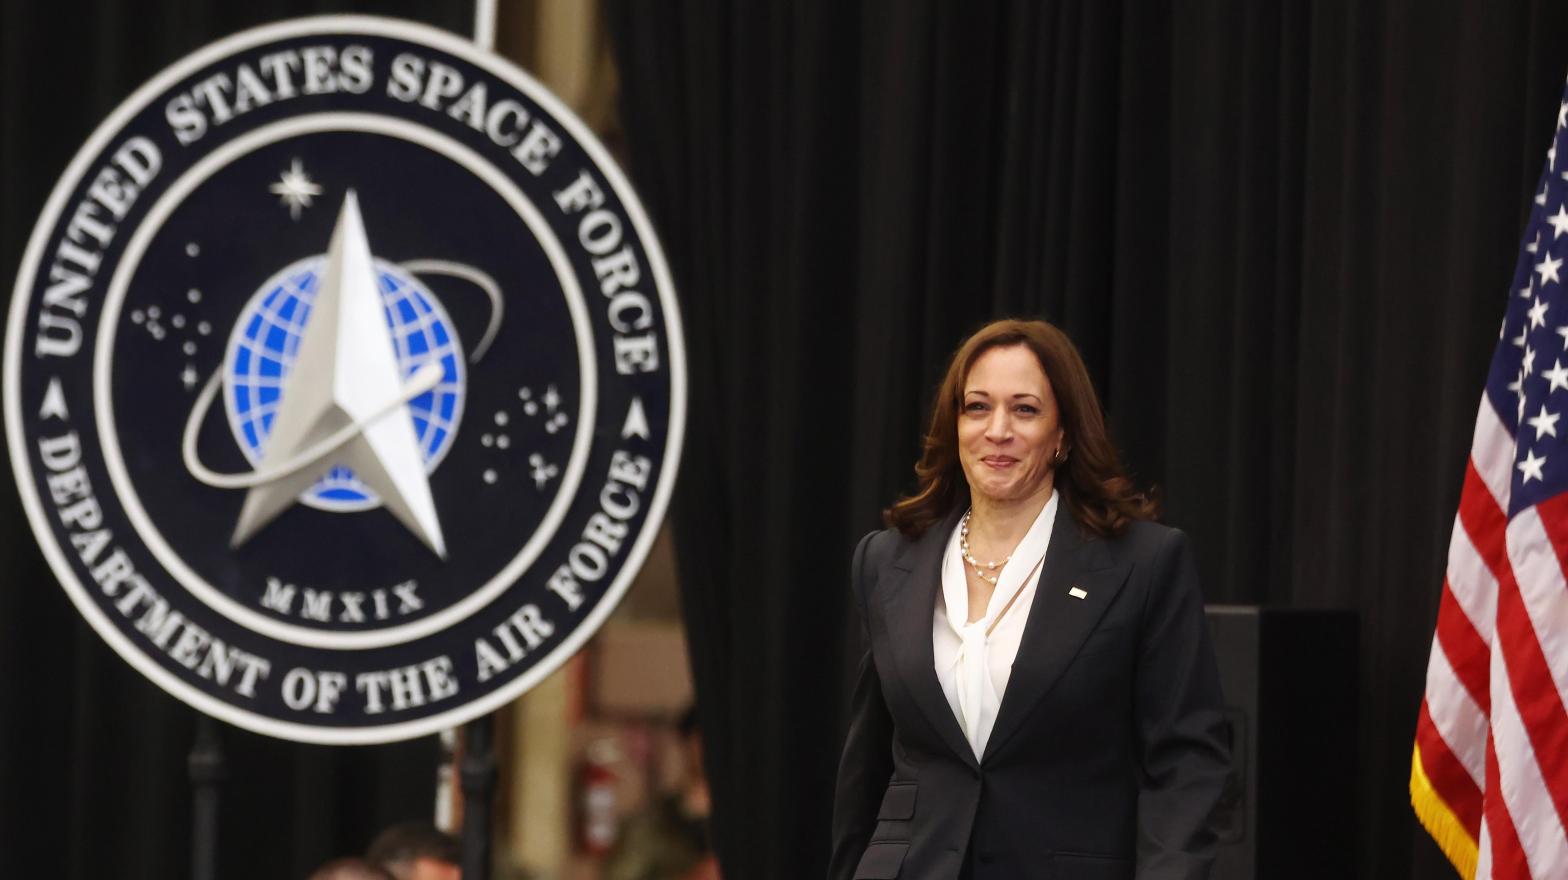 Vice President Kamala Harris announced the US stance on ASAT missile tests at Vandenberg Space Force Base yesterday. (Image: Mario Tama, Getty Images)